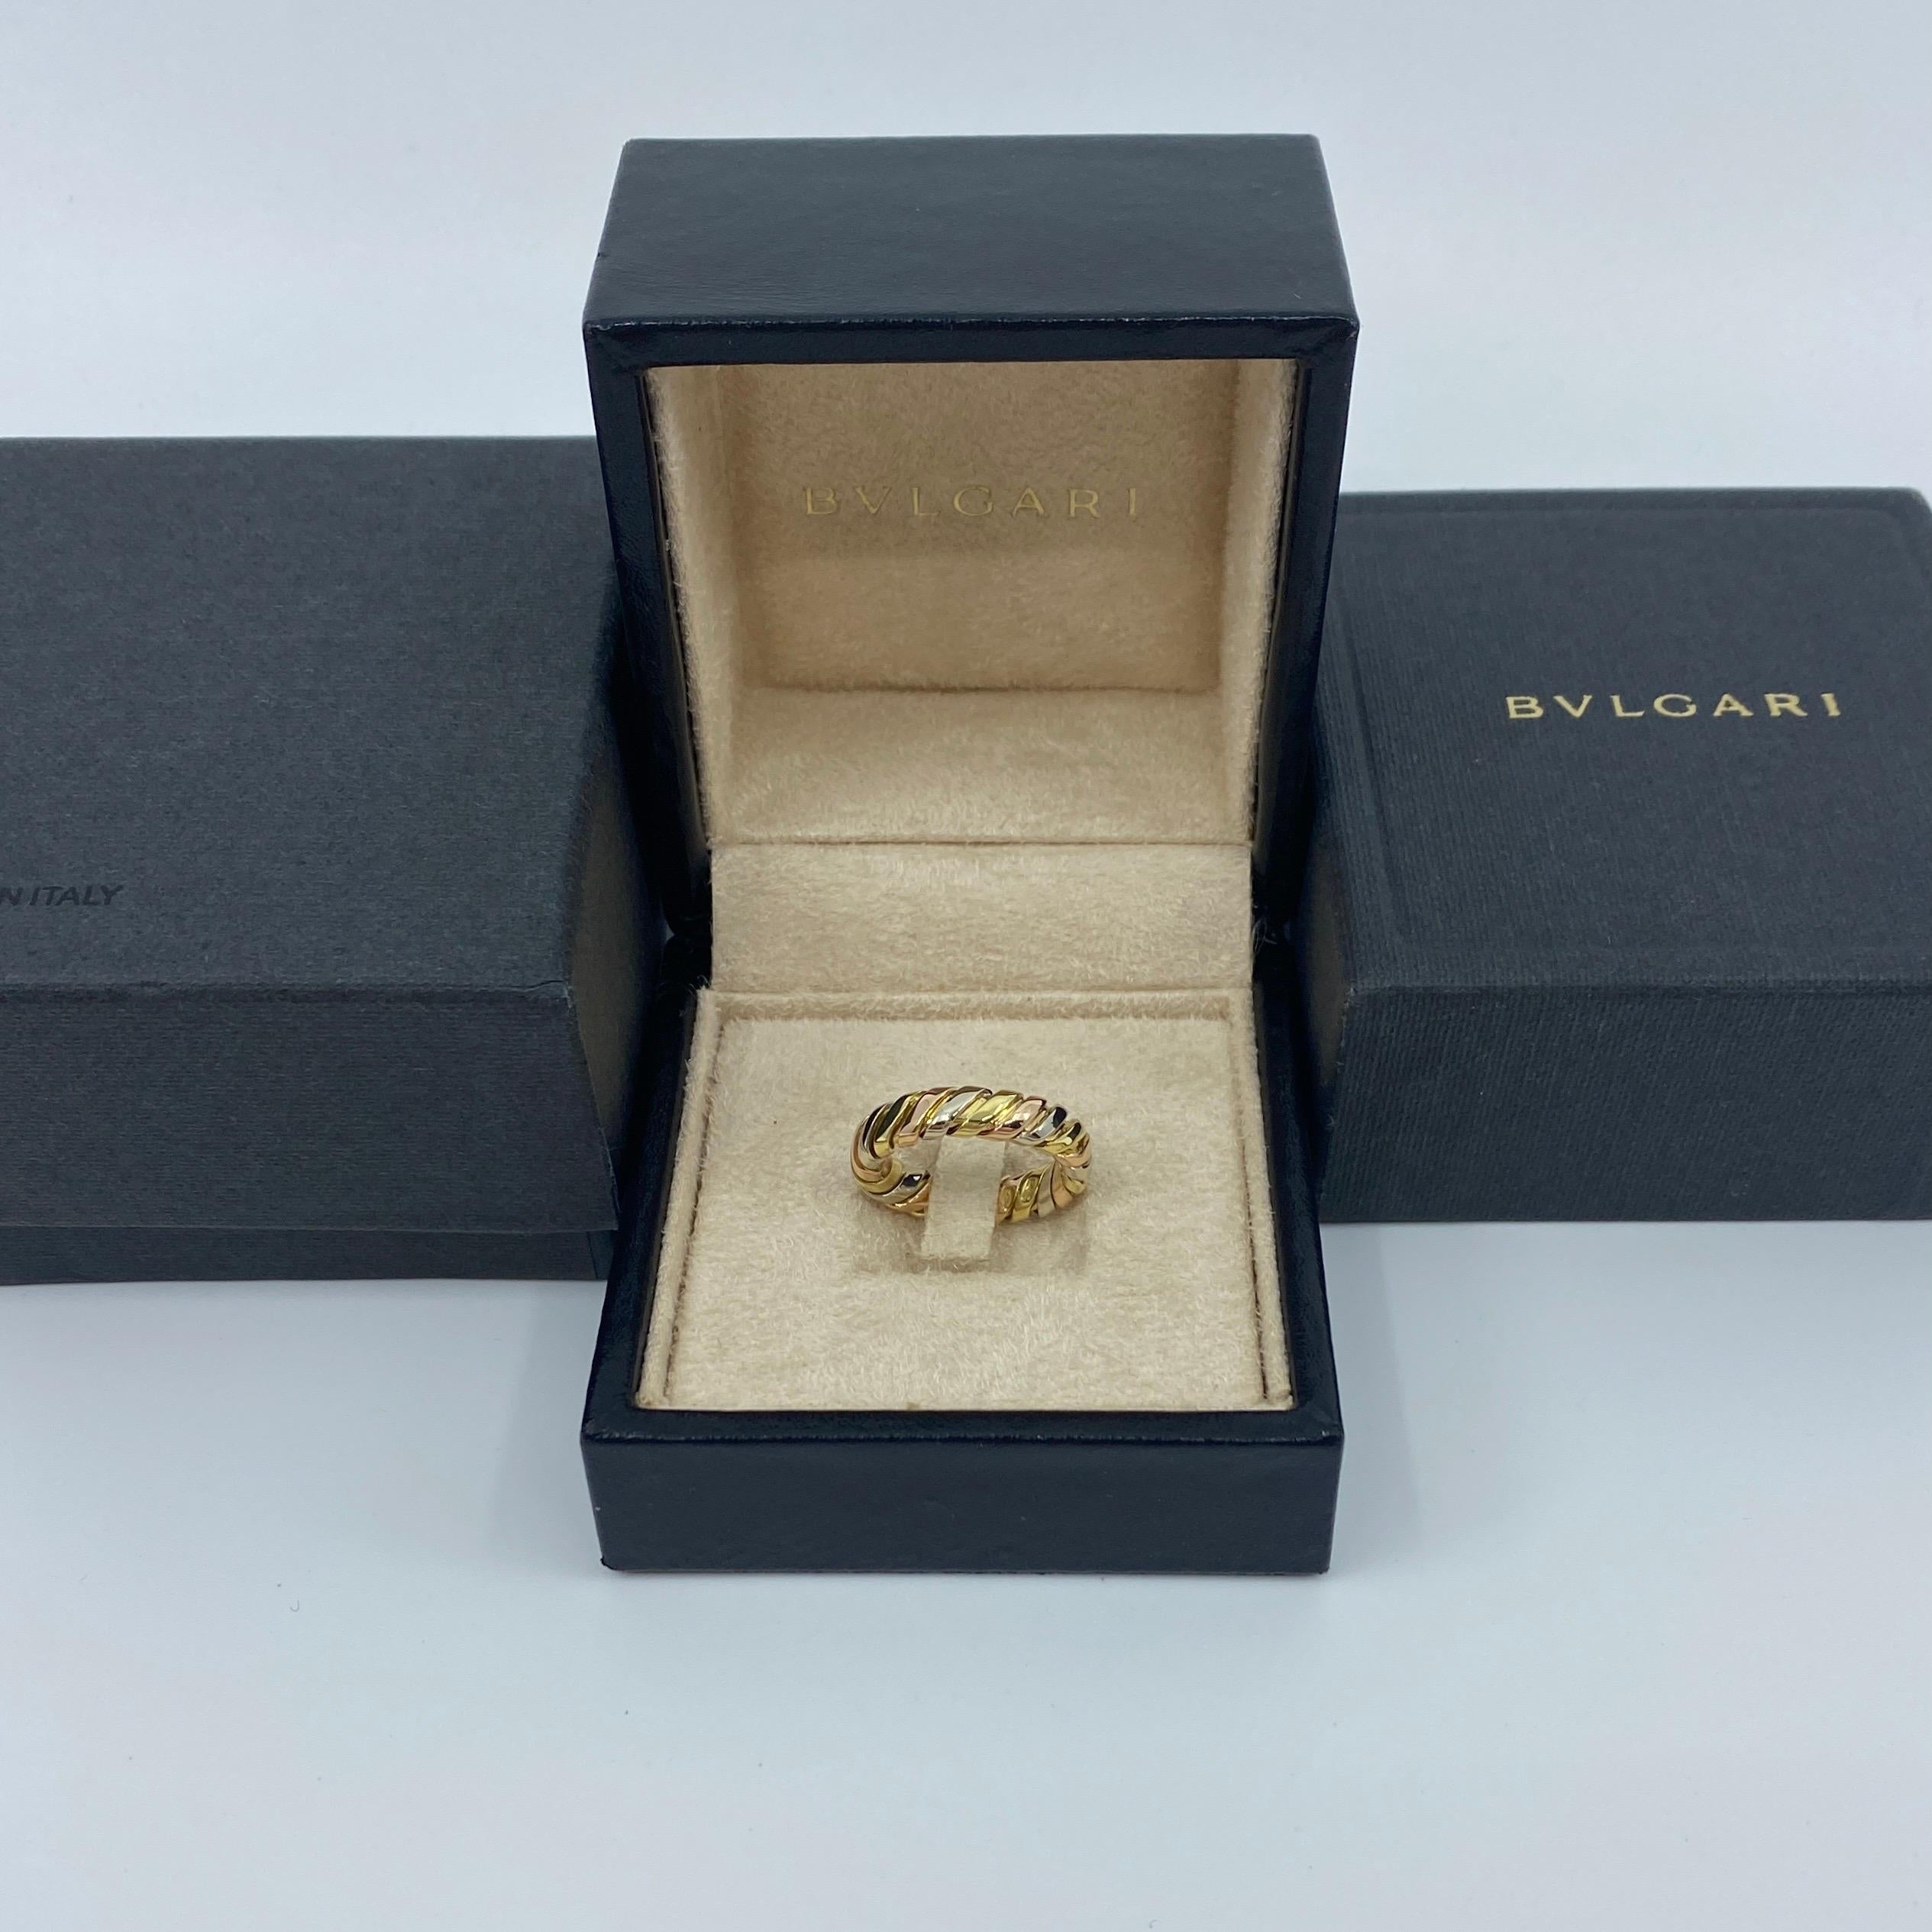 Vintage 18k Tricolour Gold Bvlgari Tubogas Twist Swirl Band Ring.

This stylish design features alternating bands of white, yellow and rose gold.
In excellent condition, has been professionally polished and cleaned.

Ring size UK L -  US 6. Some